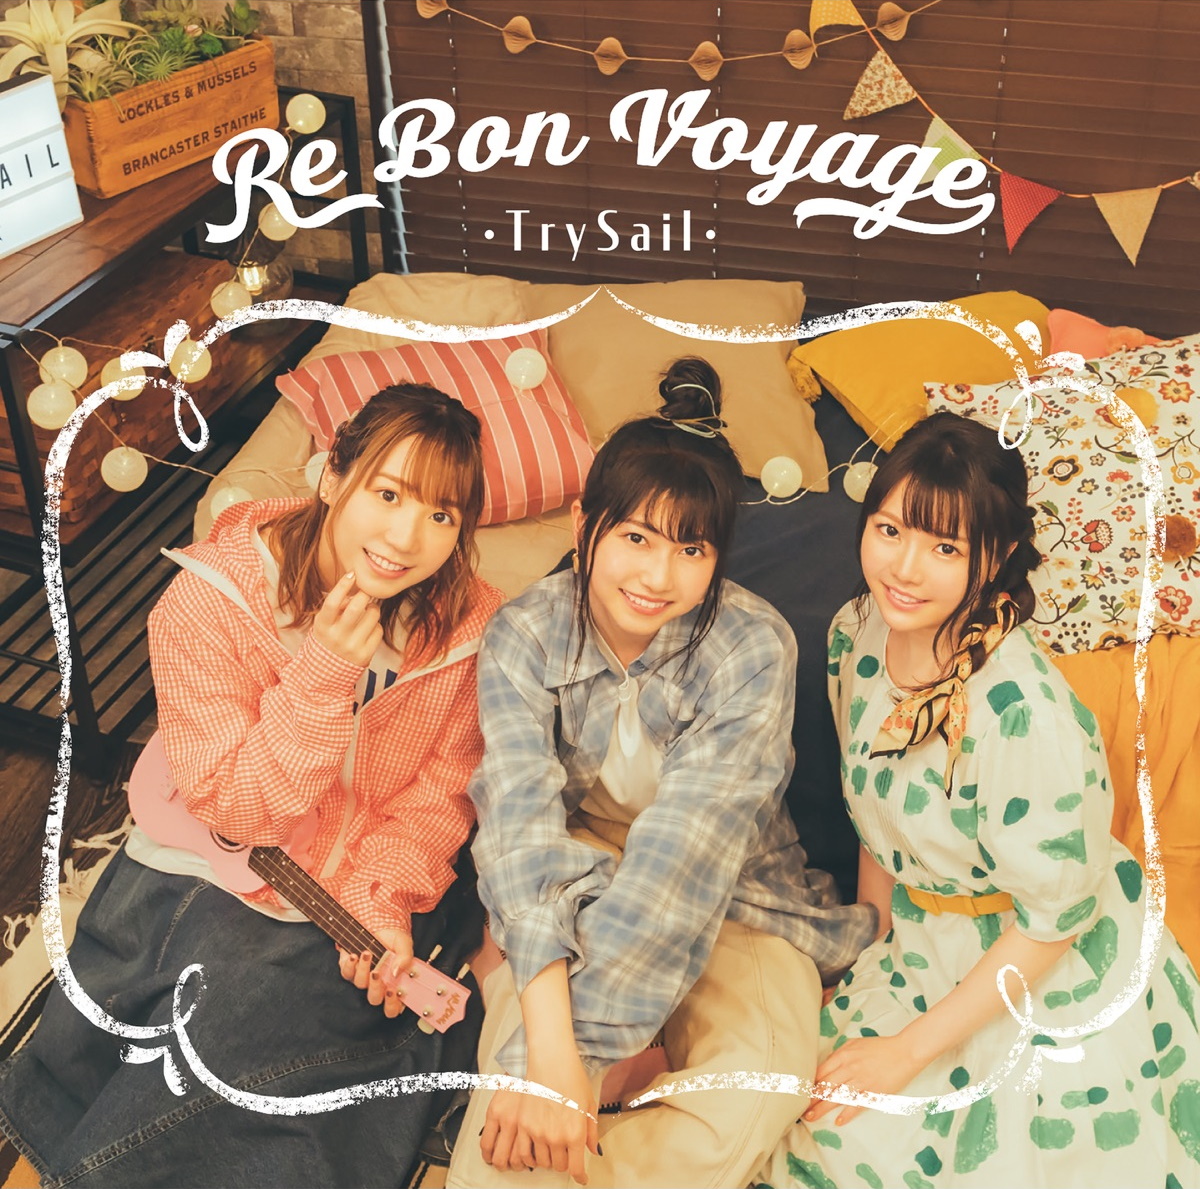 Cover for『TrySail - My Heart Revival』from the release『Re Bon Voyage』